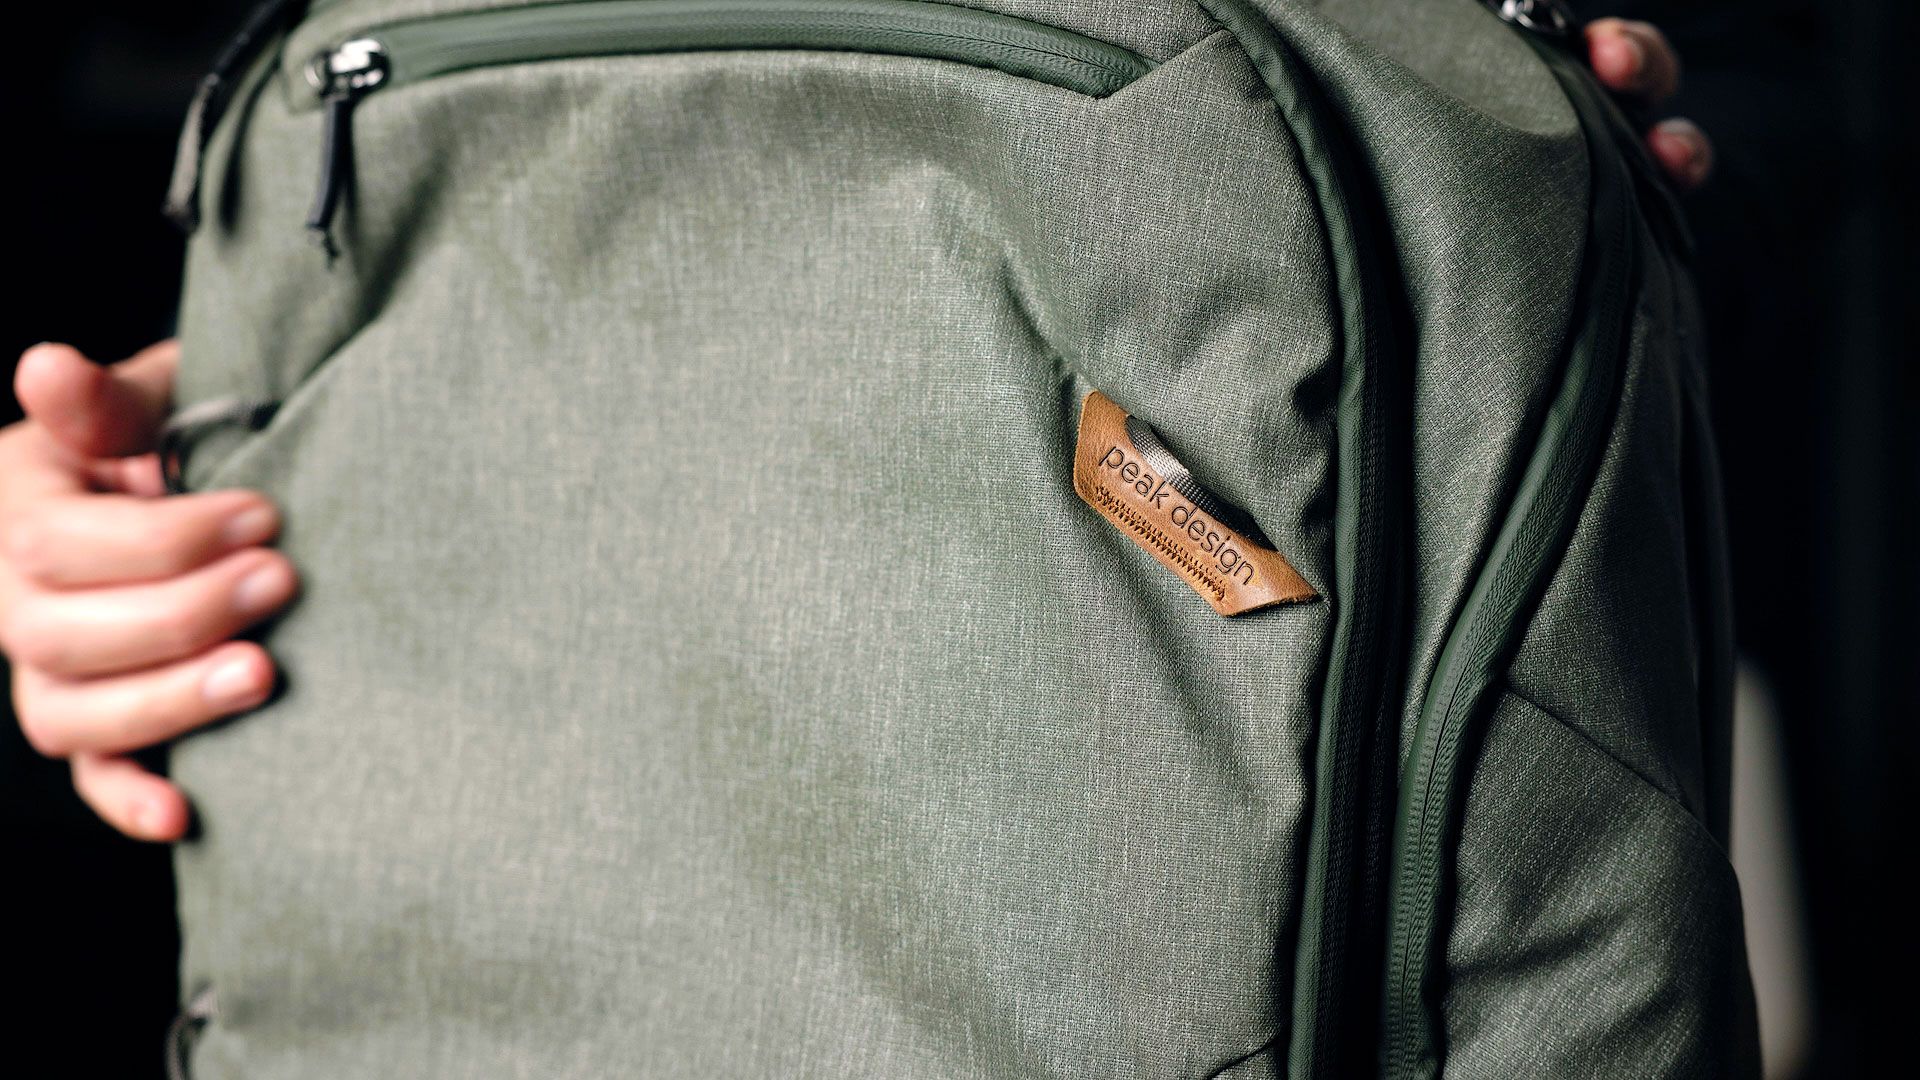 Nylon material in the 45L Travel Backpack